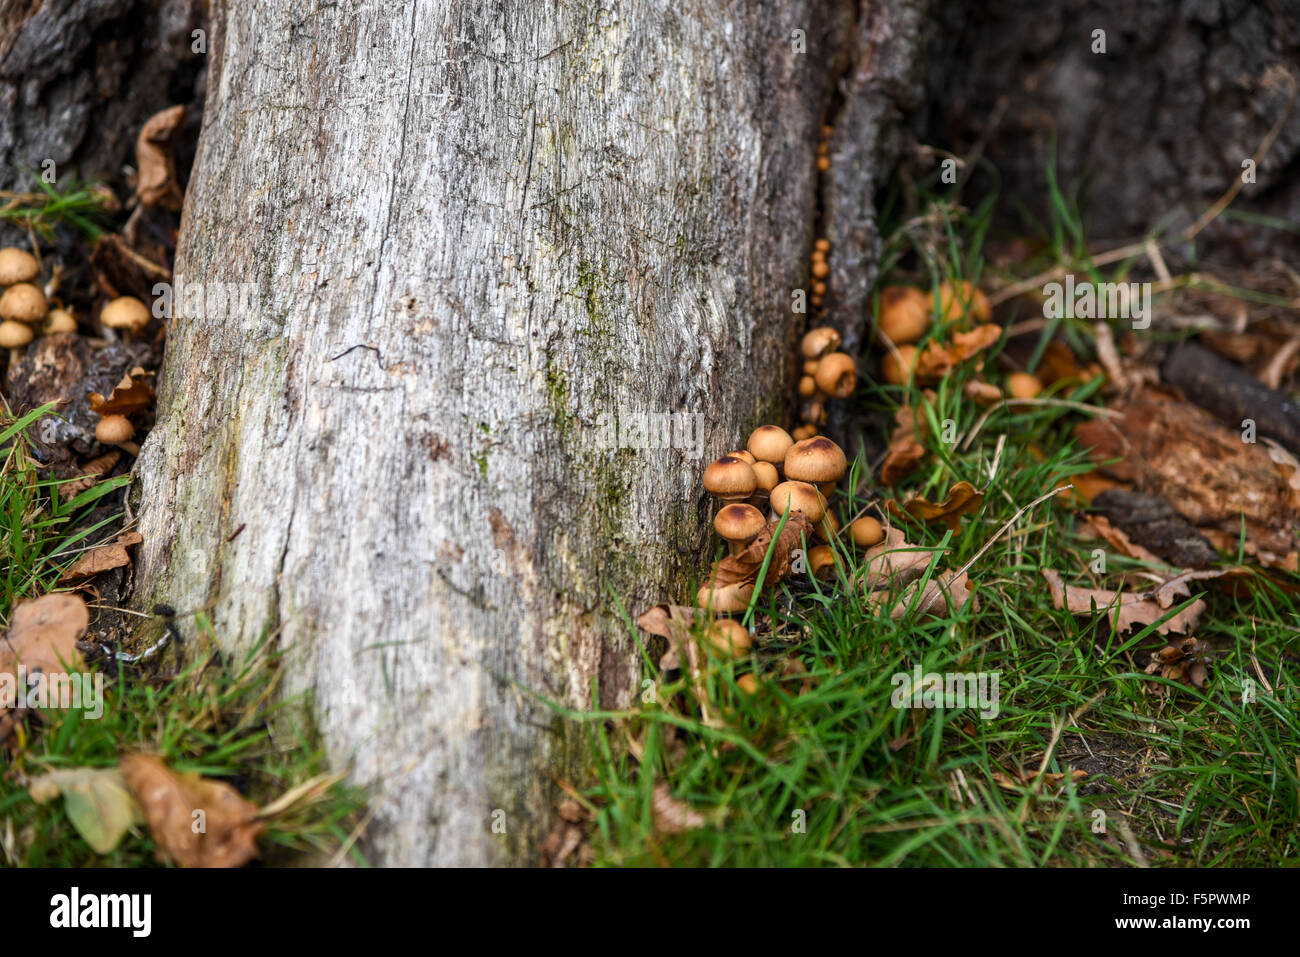 A bunch of mushrooms grow next to wood root Stock Photo